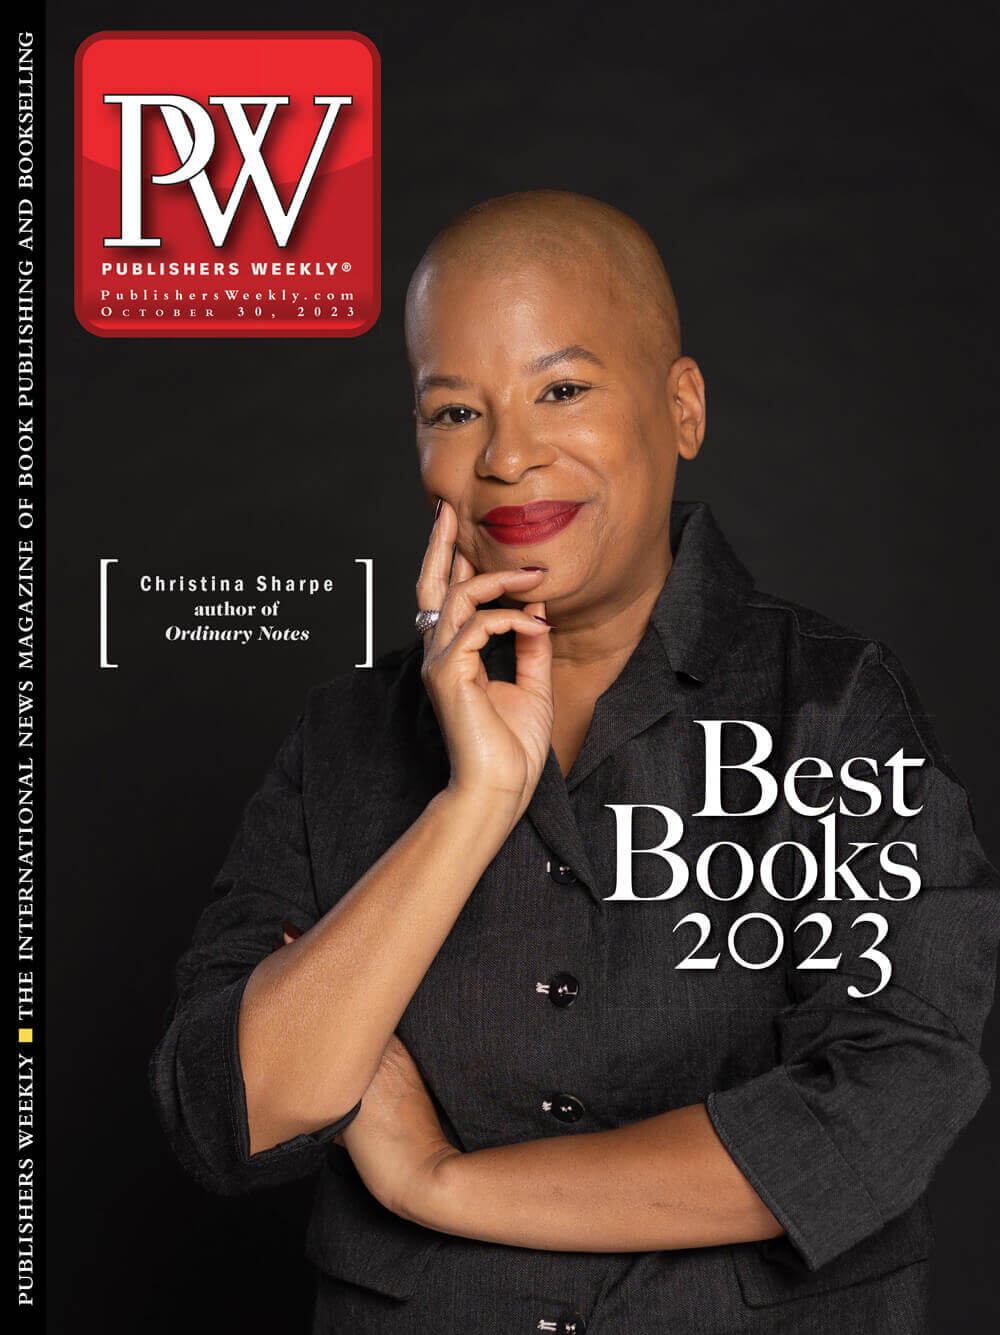 Publishers Weekly Has Announced Their List of Best Books 2023 - Good e ...